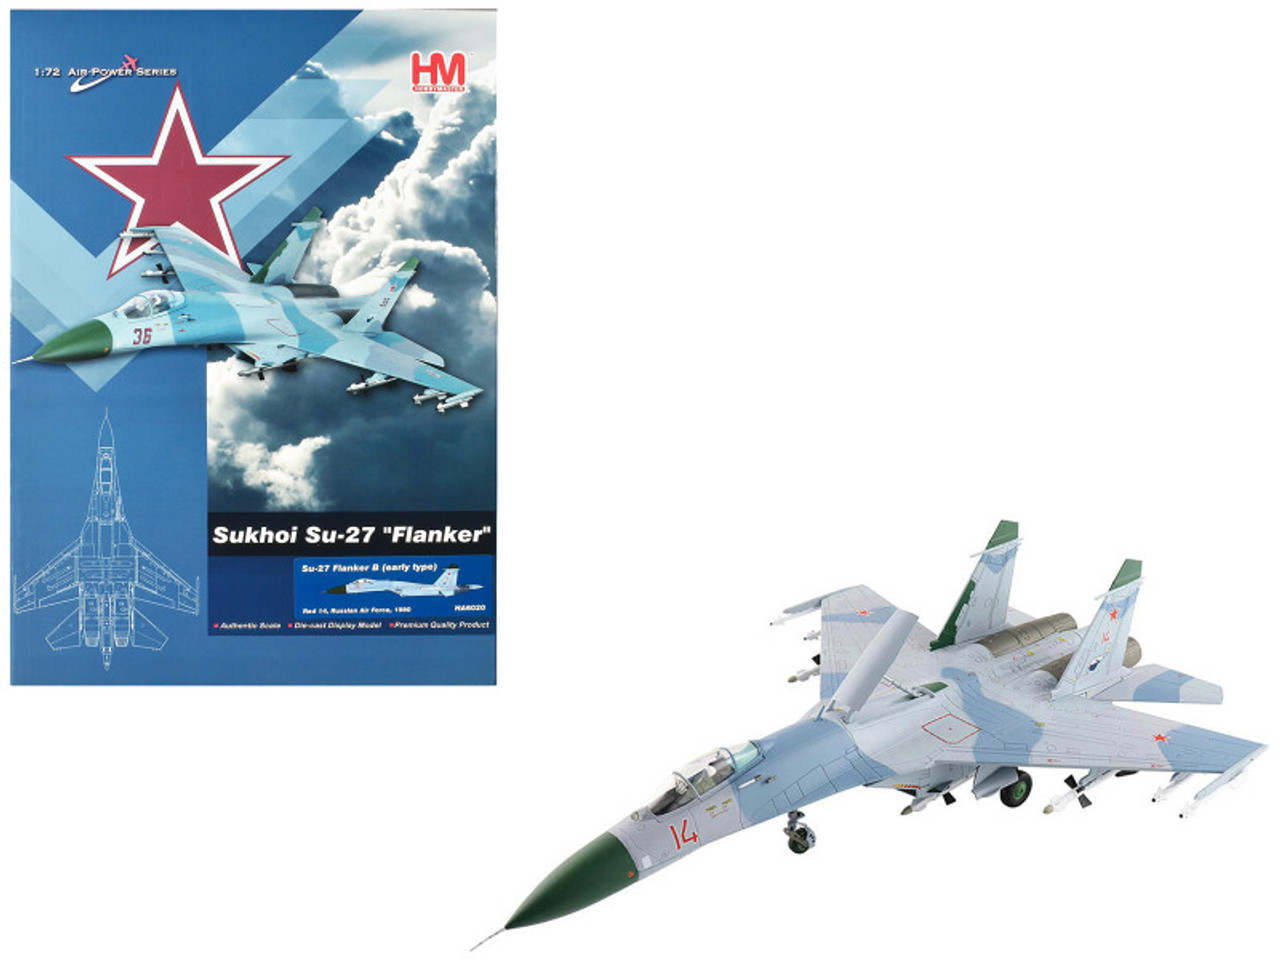 Sukhoi Su-27 Flanker B (Early Type) Fighter Aircraft "#14" (1990) Russian Air Force "Air Power Series" 1/72 Diecast Model by Hobby Master